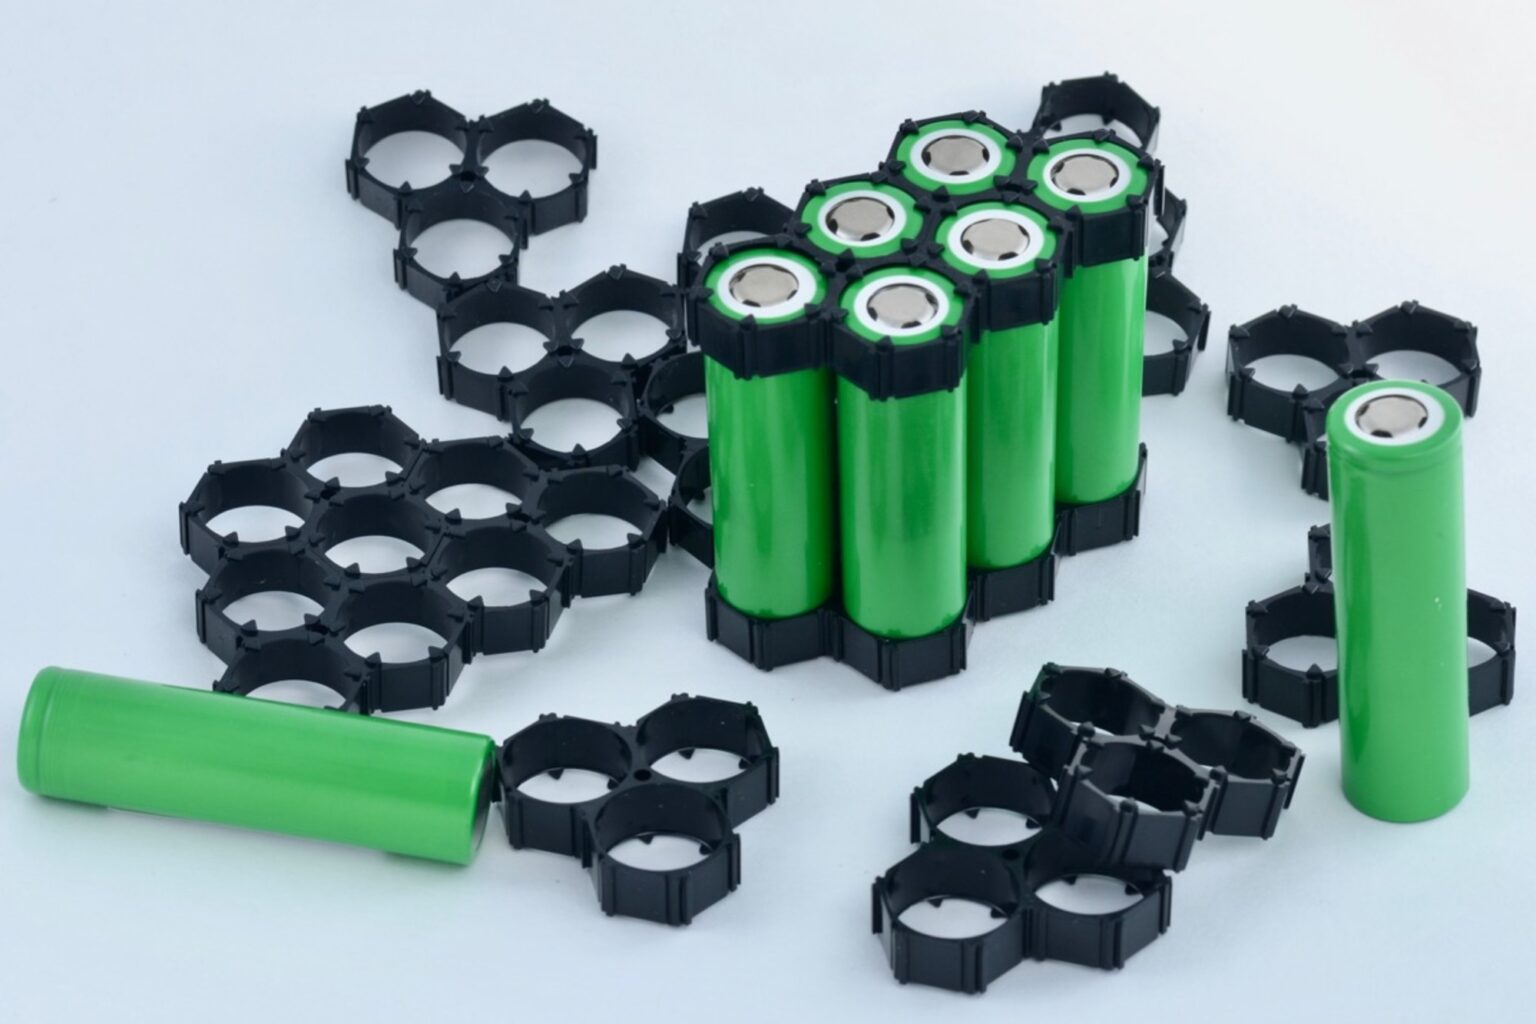 18650 batteries require special care. Check out our detailed guide on batteries and how to best handle them.